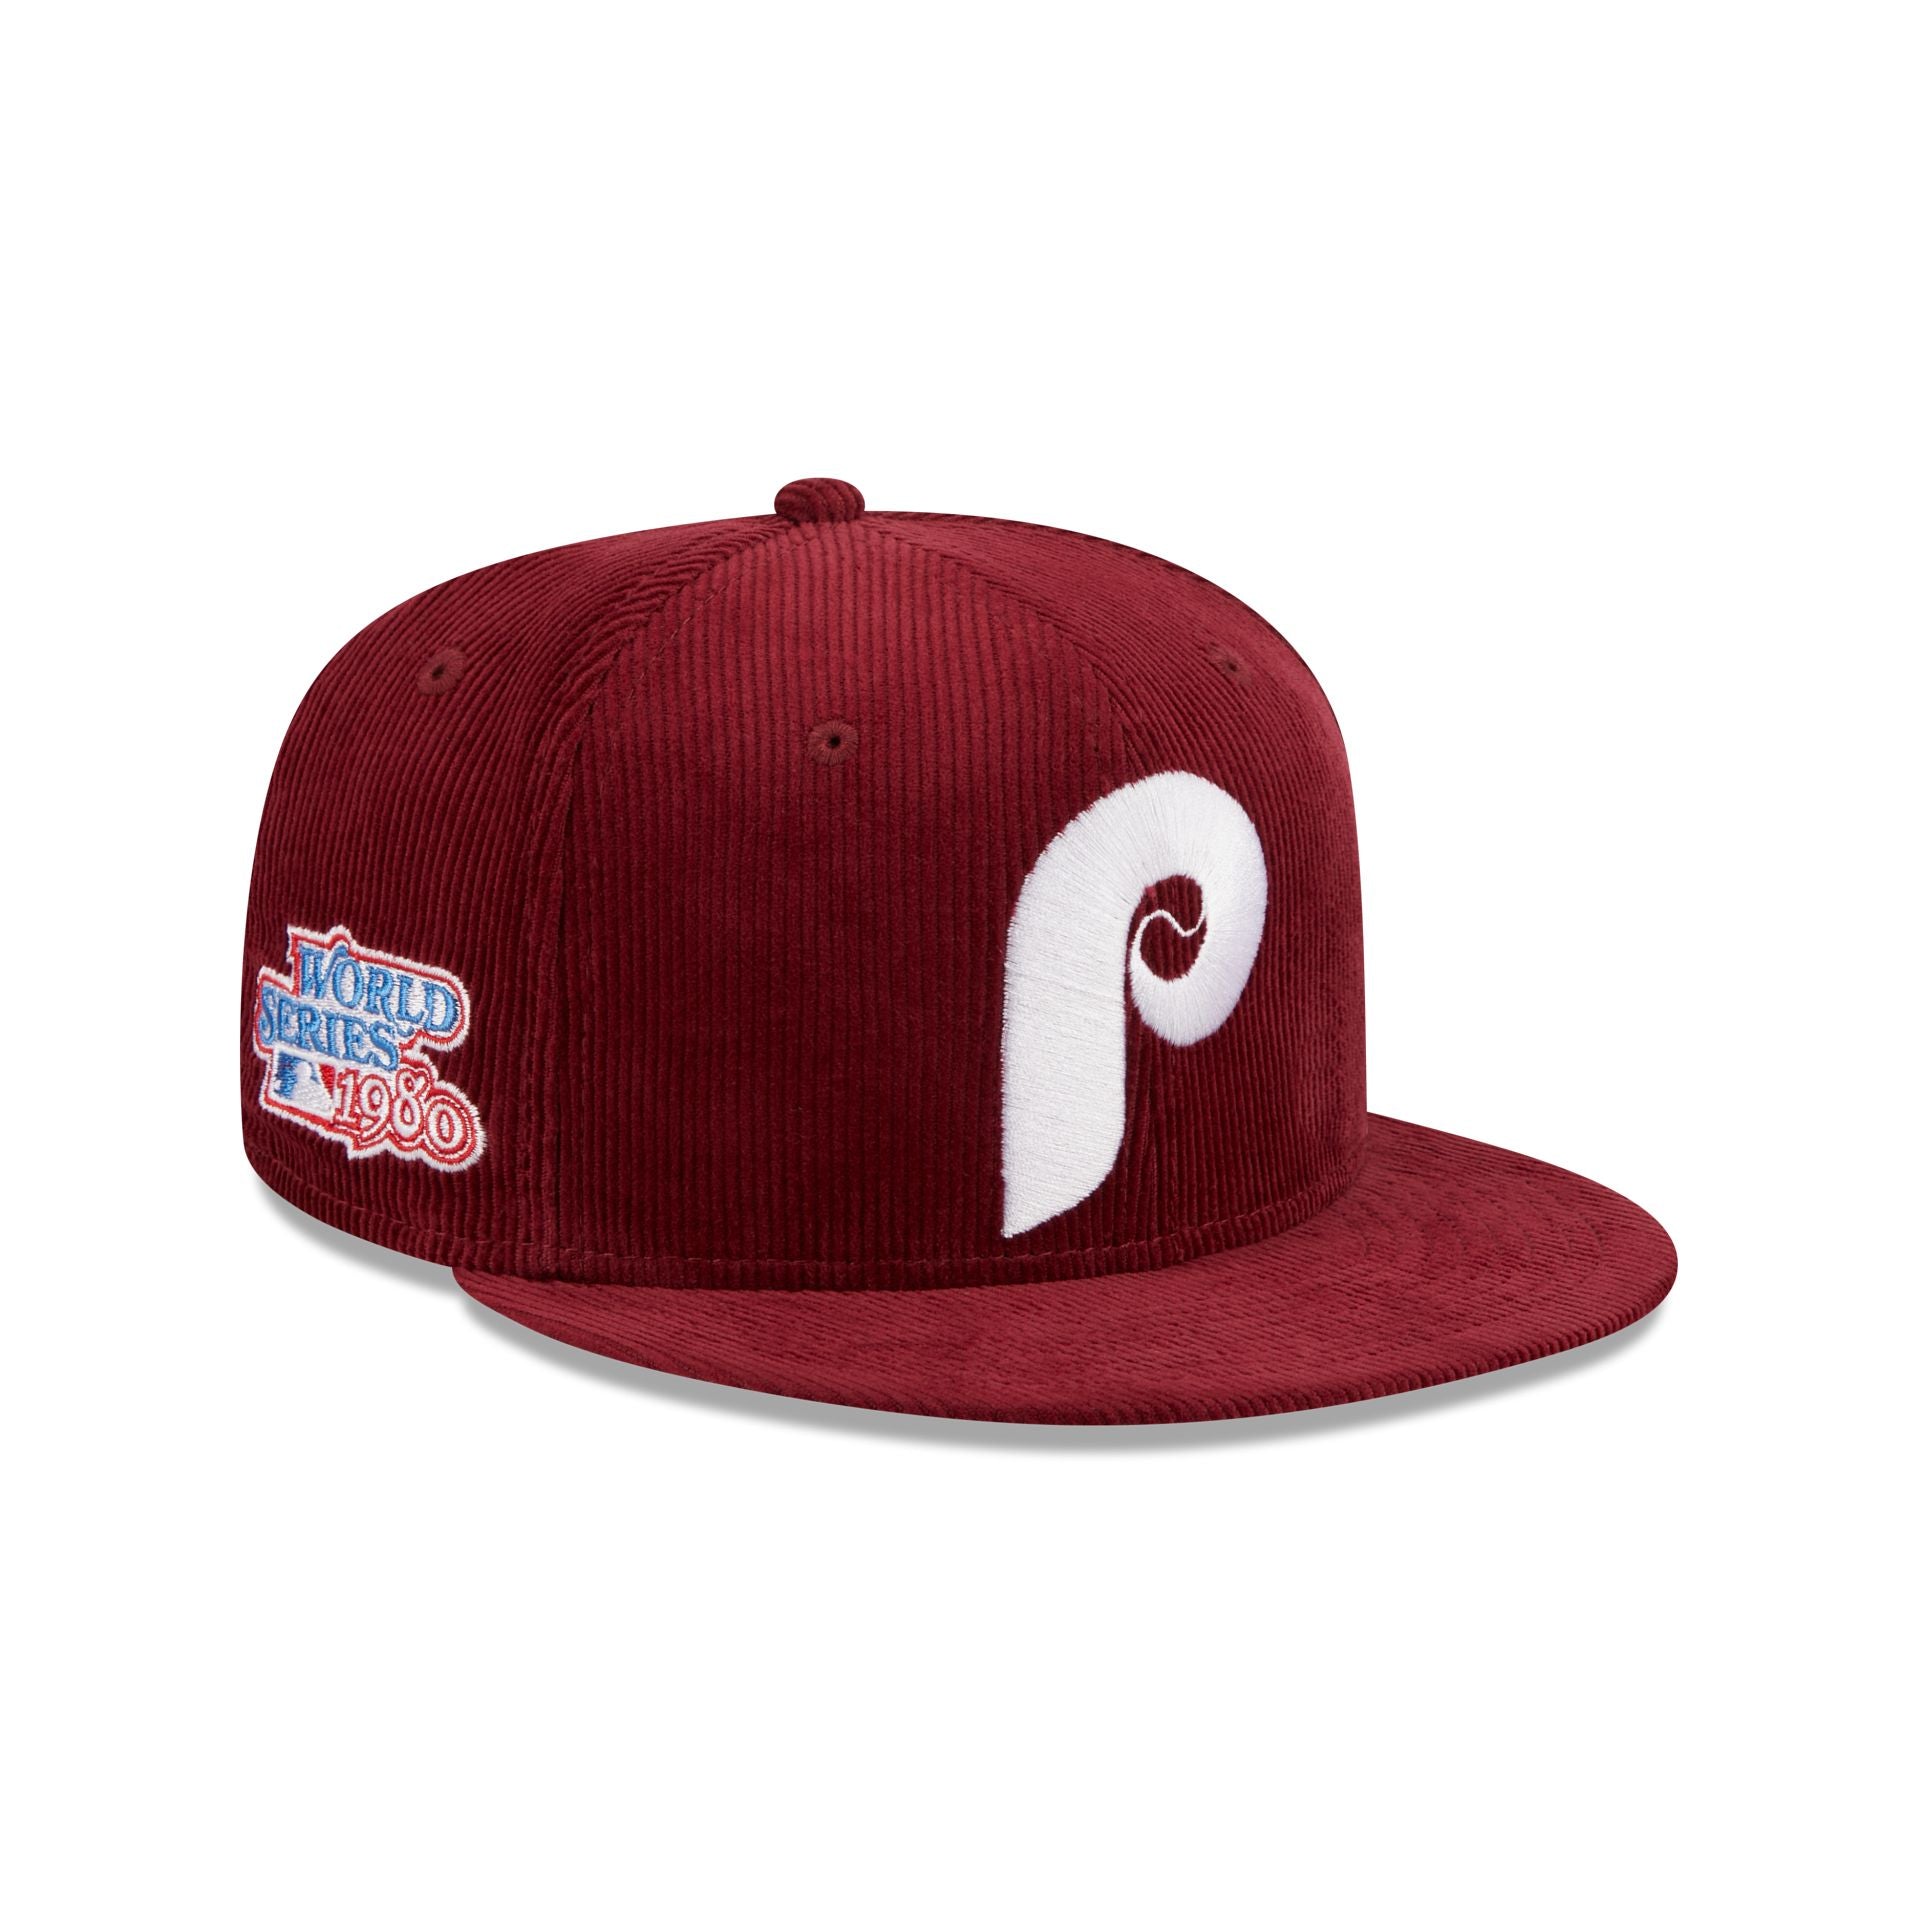 Official New Era Vintage Cord Philadelphia Phillies 59FIFTY Fitted Cap  C107_107 C107_107